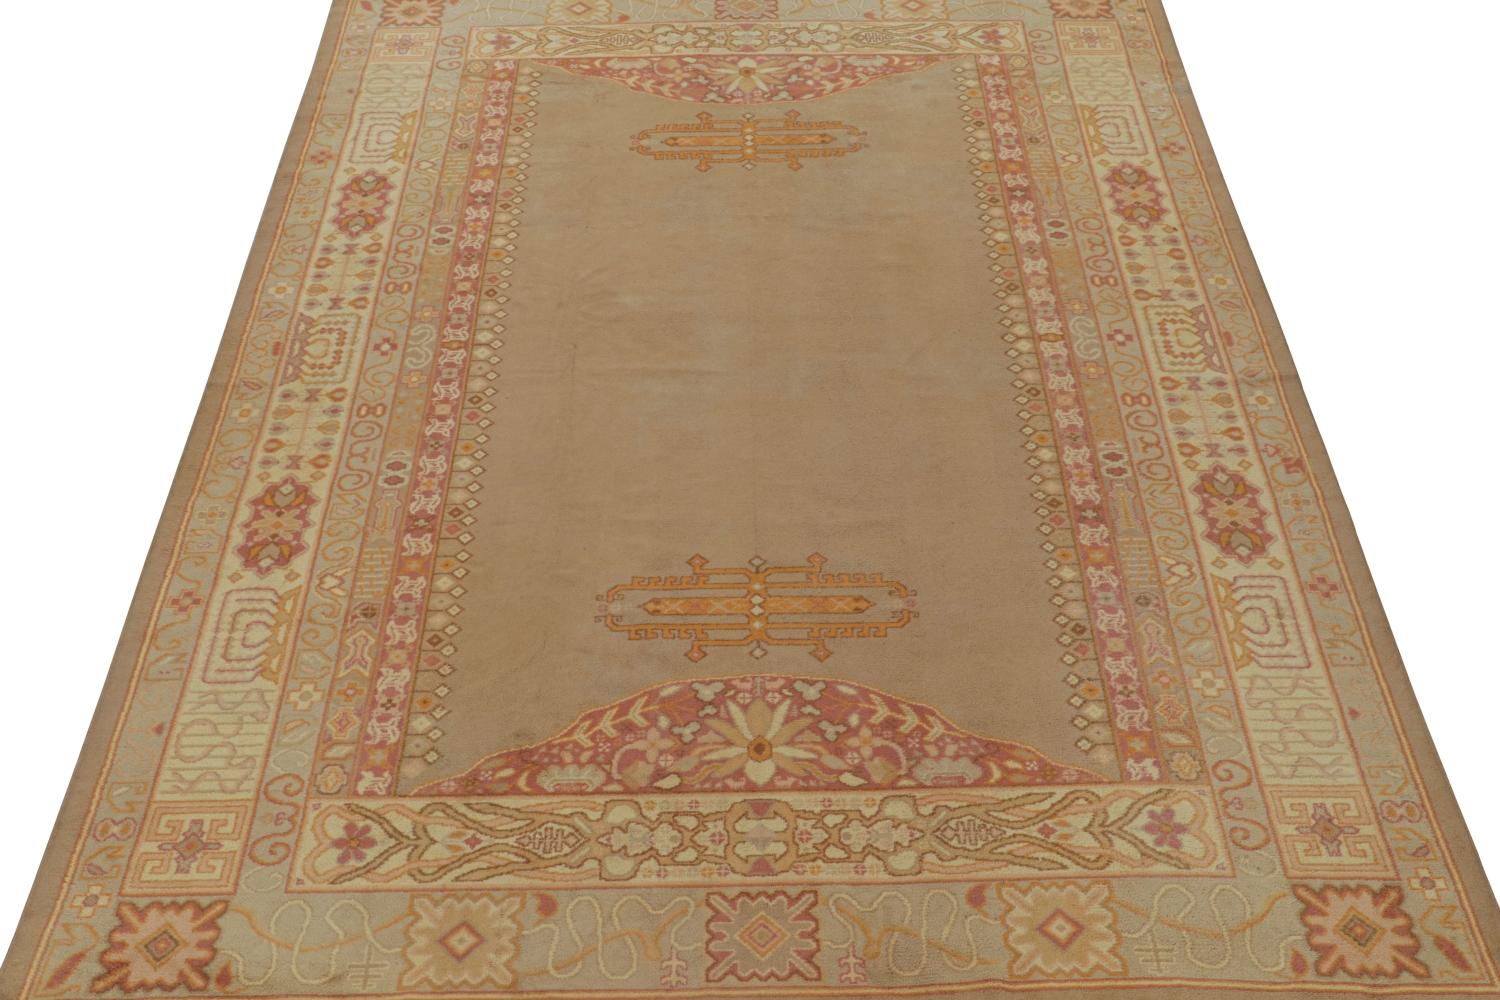 Antique Rug in Beige-Brown with Open Field & Geometric Borders In Good Condition For Sale In Long Island City, NY